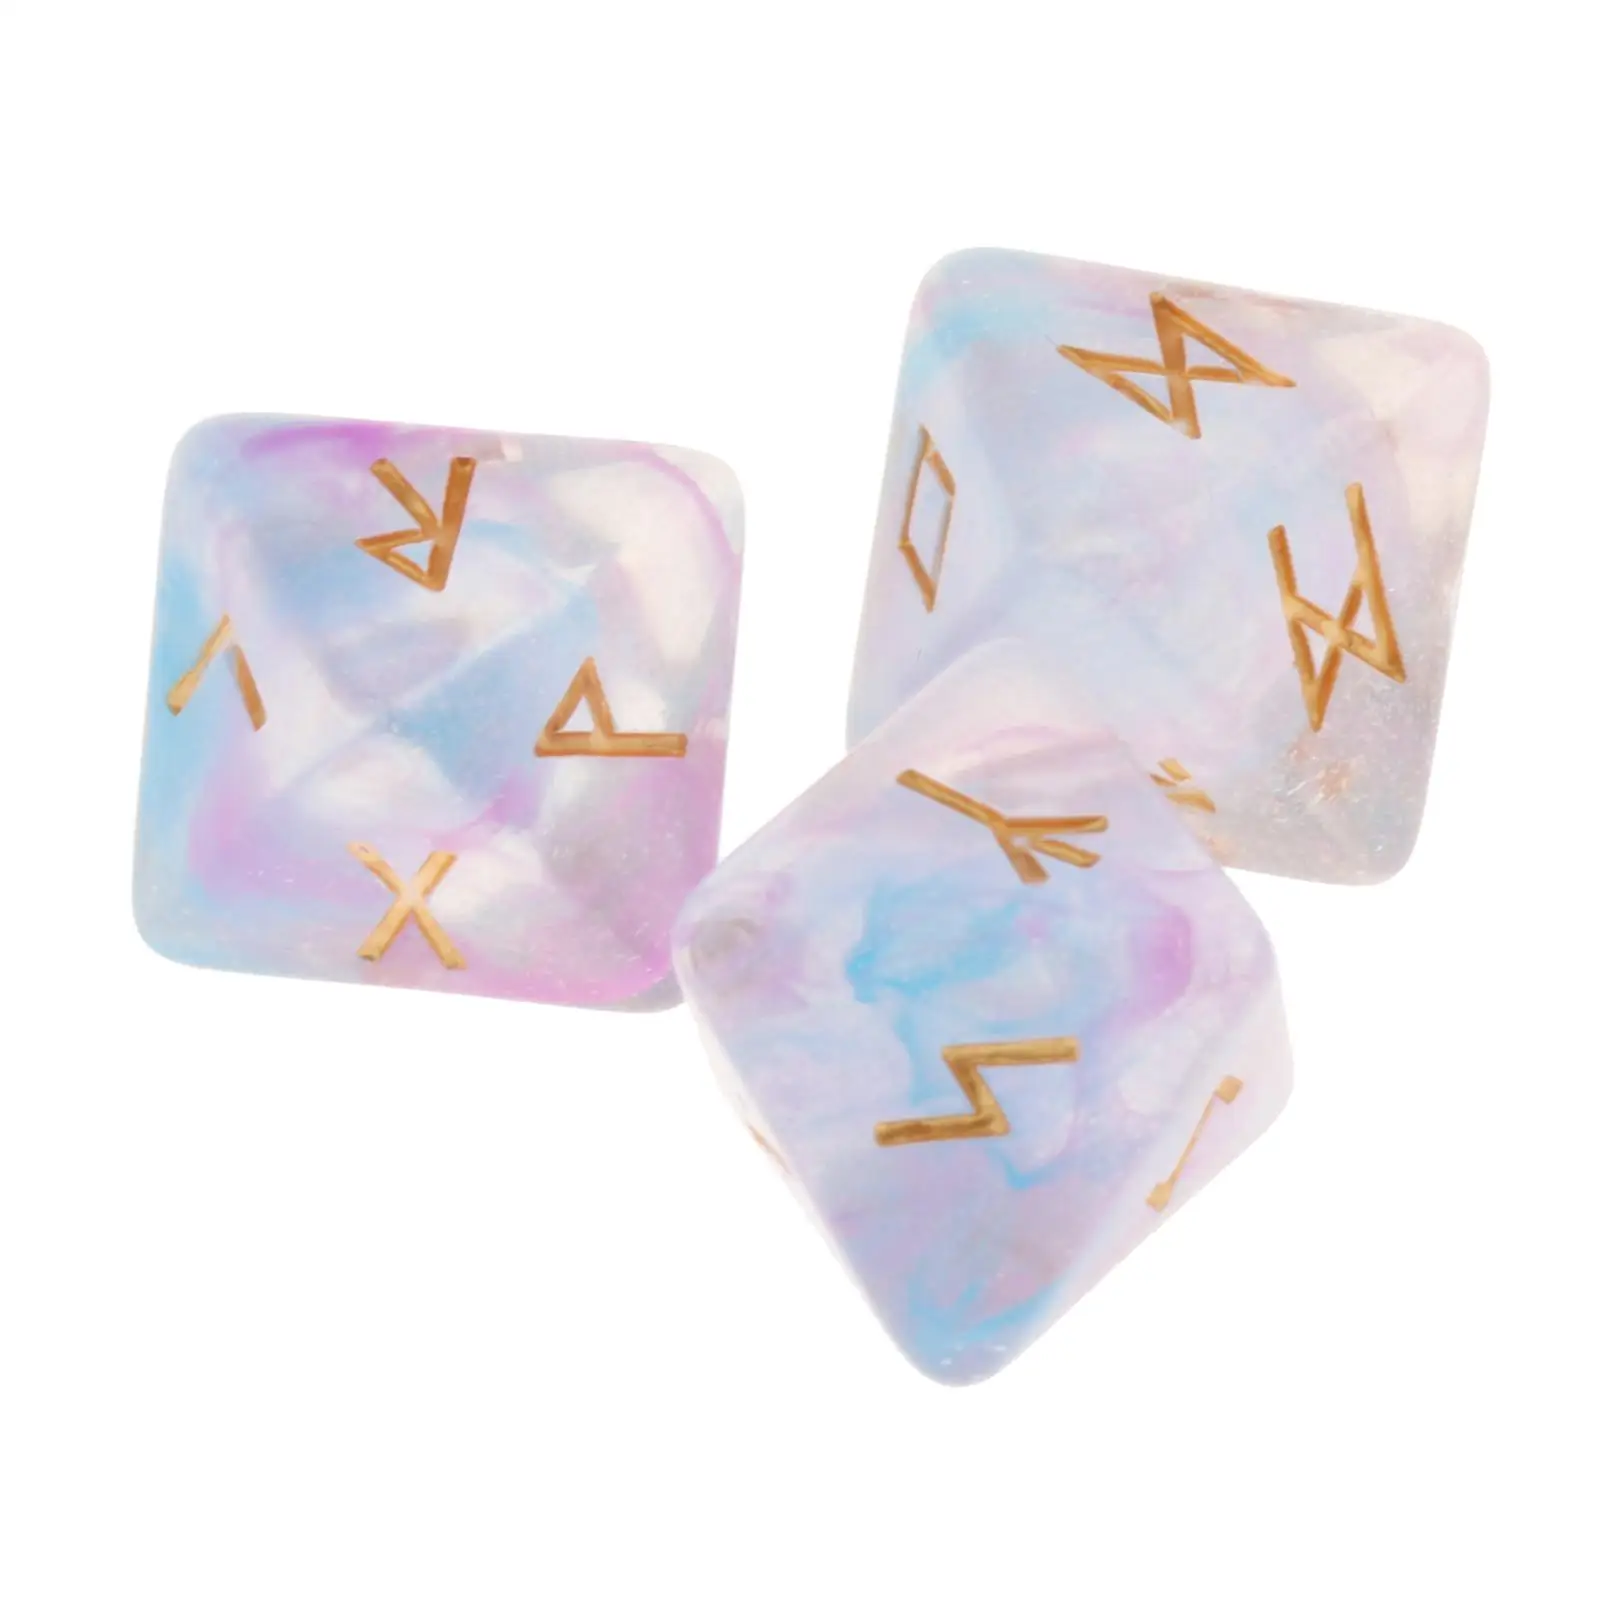 Durable Starry Star Rune Resin Polyhedral Divination Dice Astrology Good Polishing Effect for Board Roll Playing Games